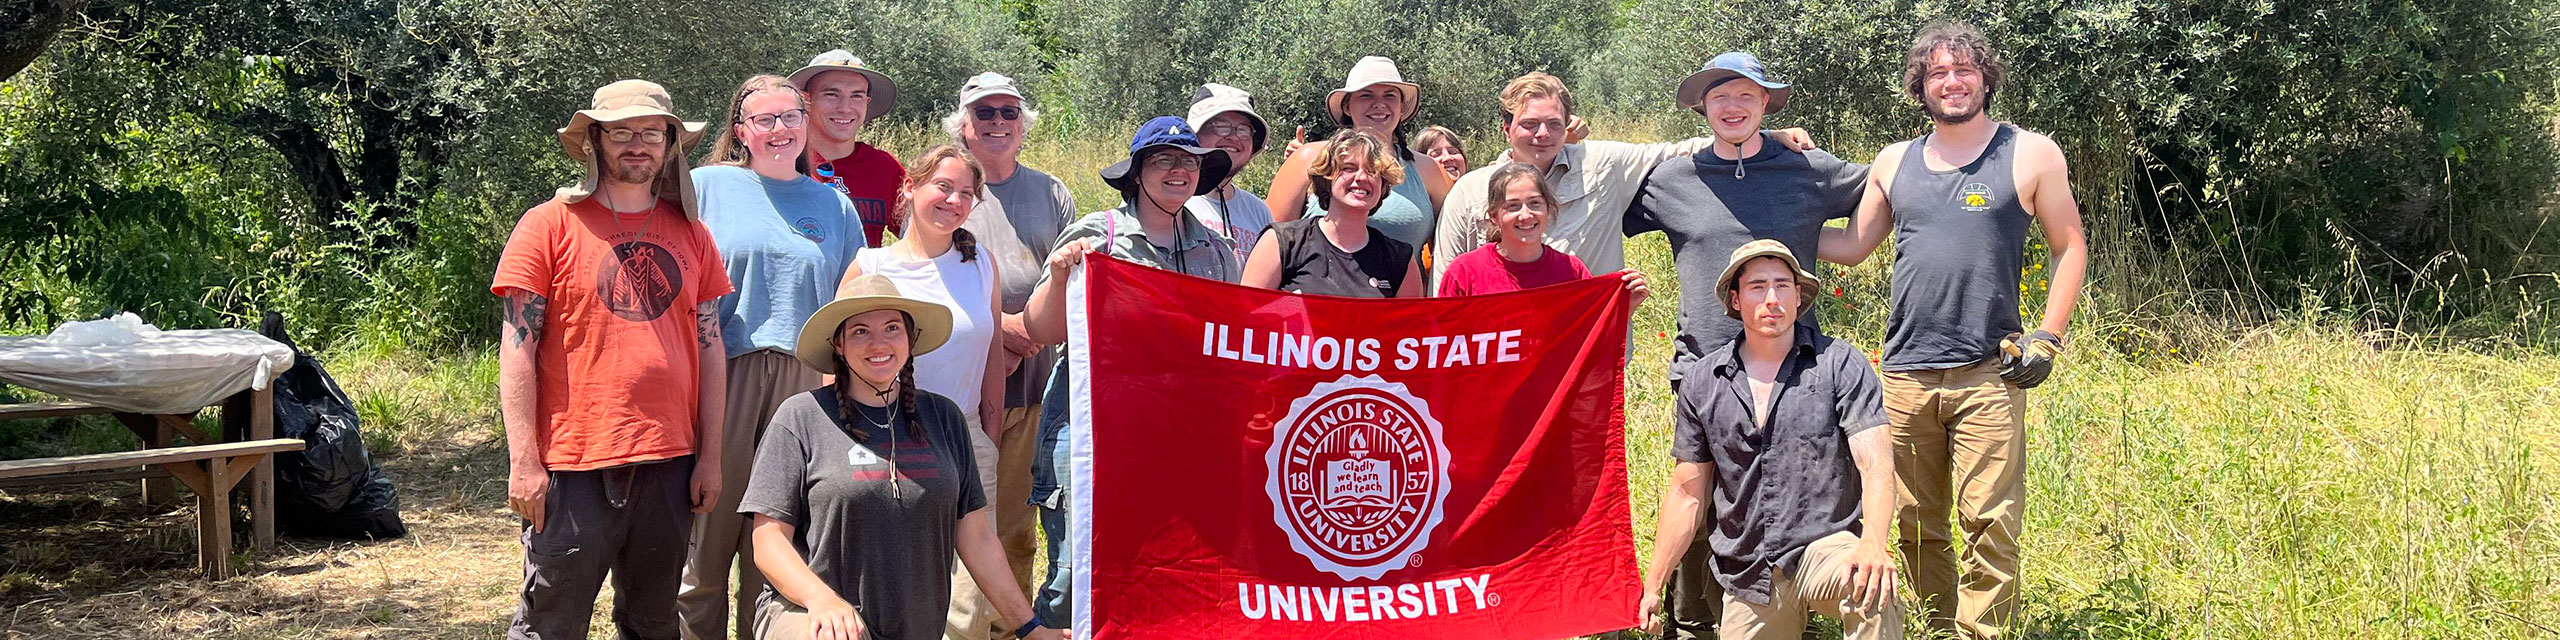 Latin students posing holding an Illinois State flag